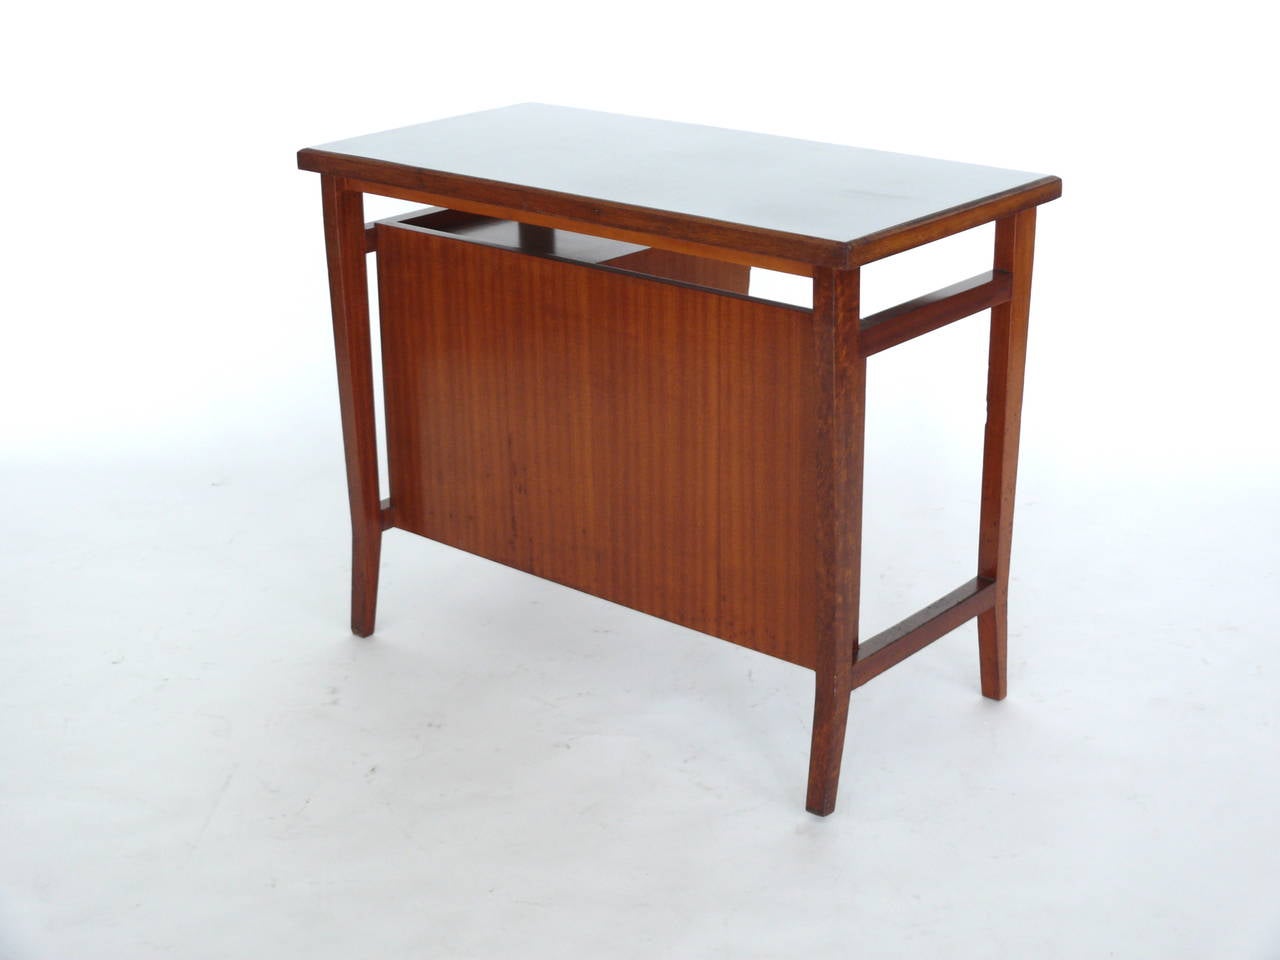 Petite architectural desk by Gio Ponti for the University of Padova. Four drawers suspend from right side of desk. Light grey Formica top in good vintage condition. Very rare piece and scale. Could be used as a vanity or entry table.